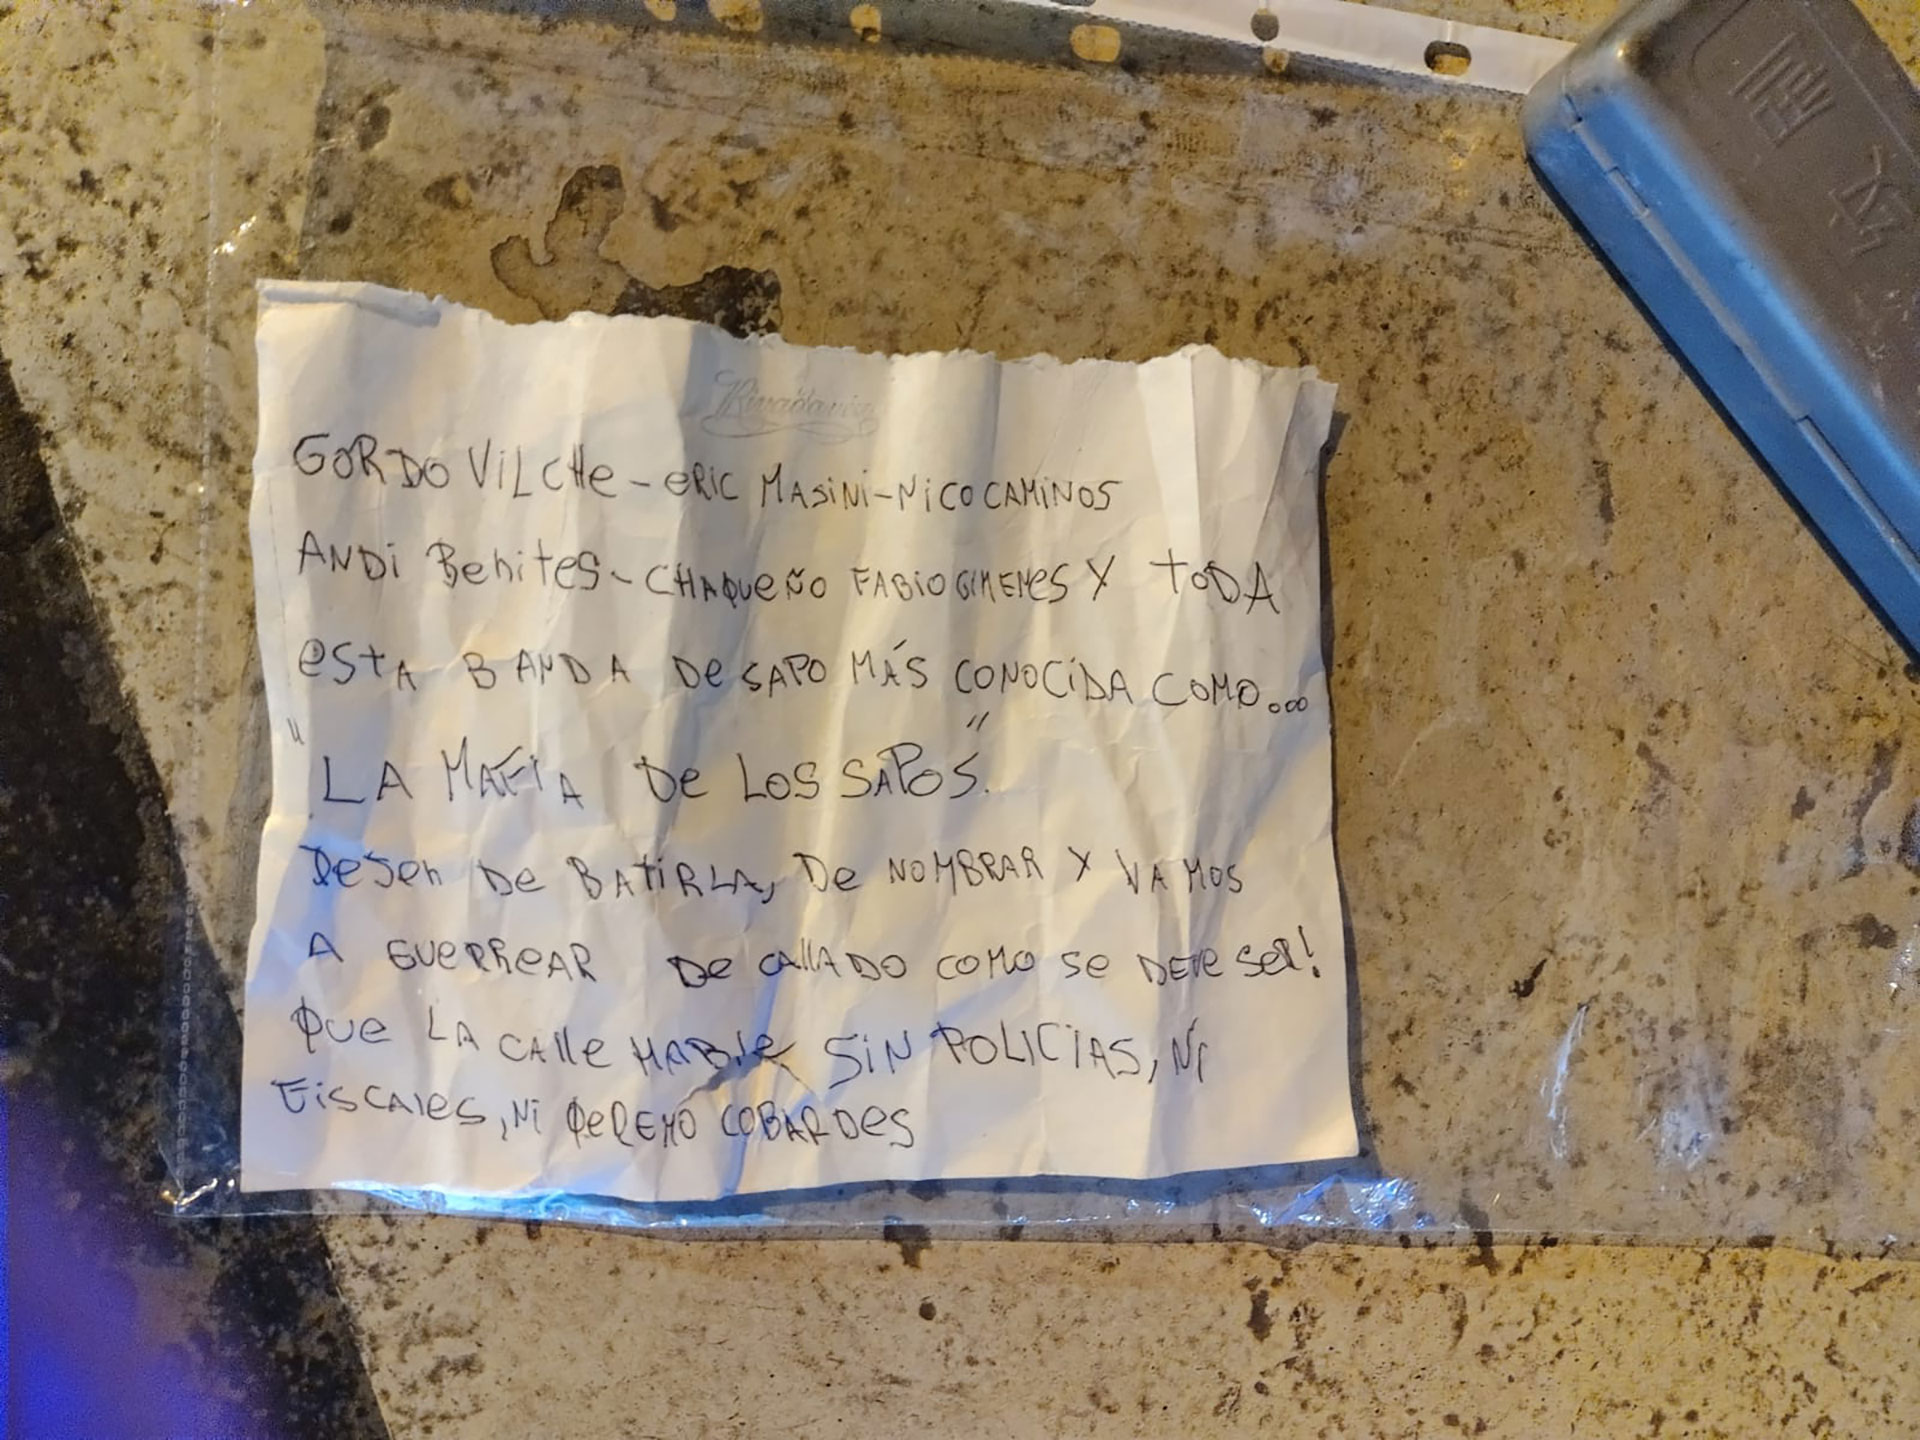 The note left by the hitmen